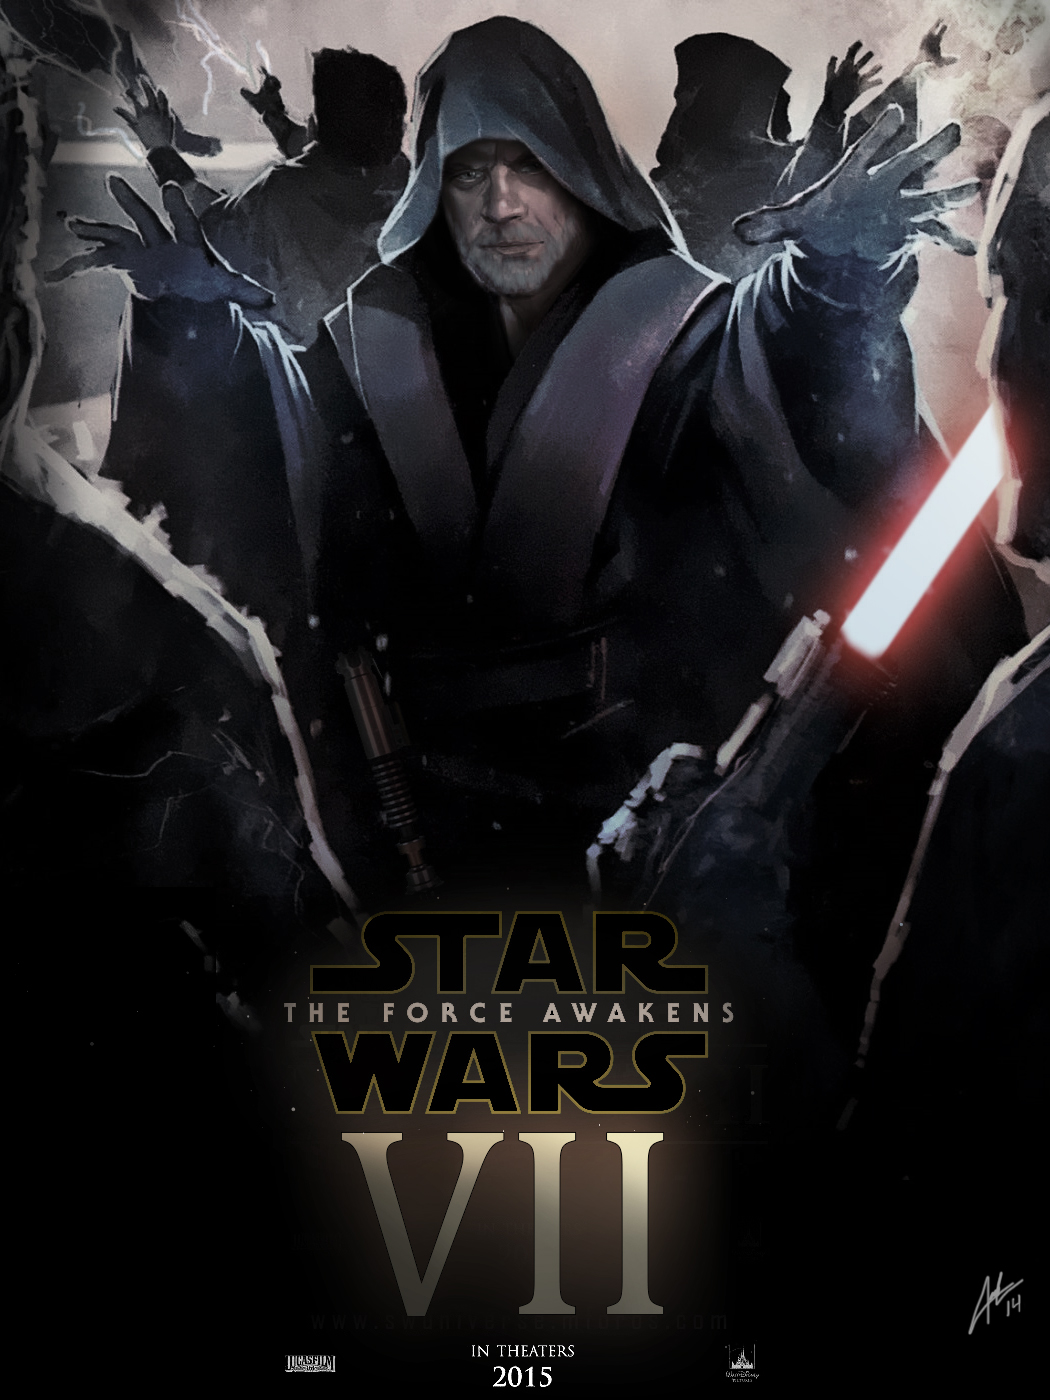 Episode VII   The Force Awakens   Poster by DarthTemoc 1050x1400